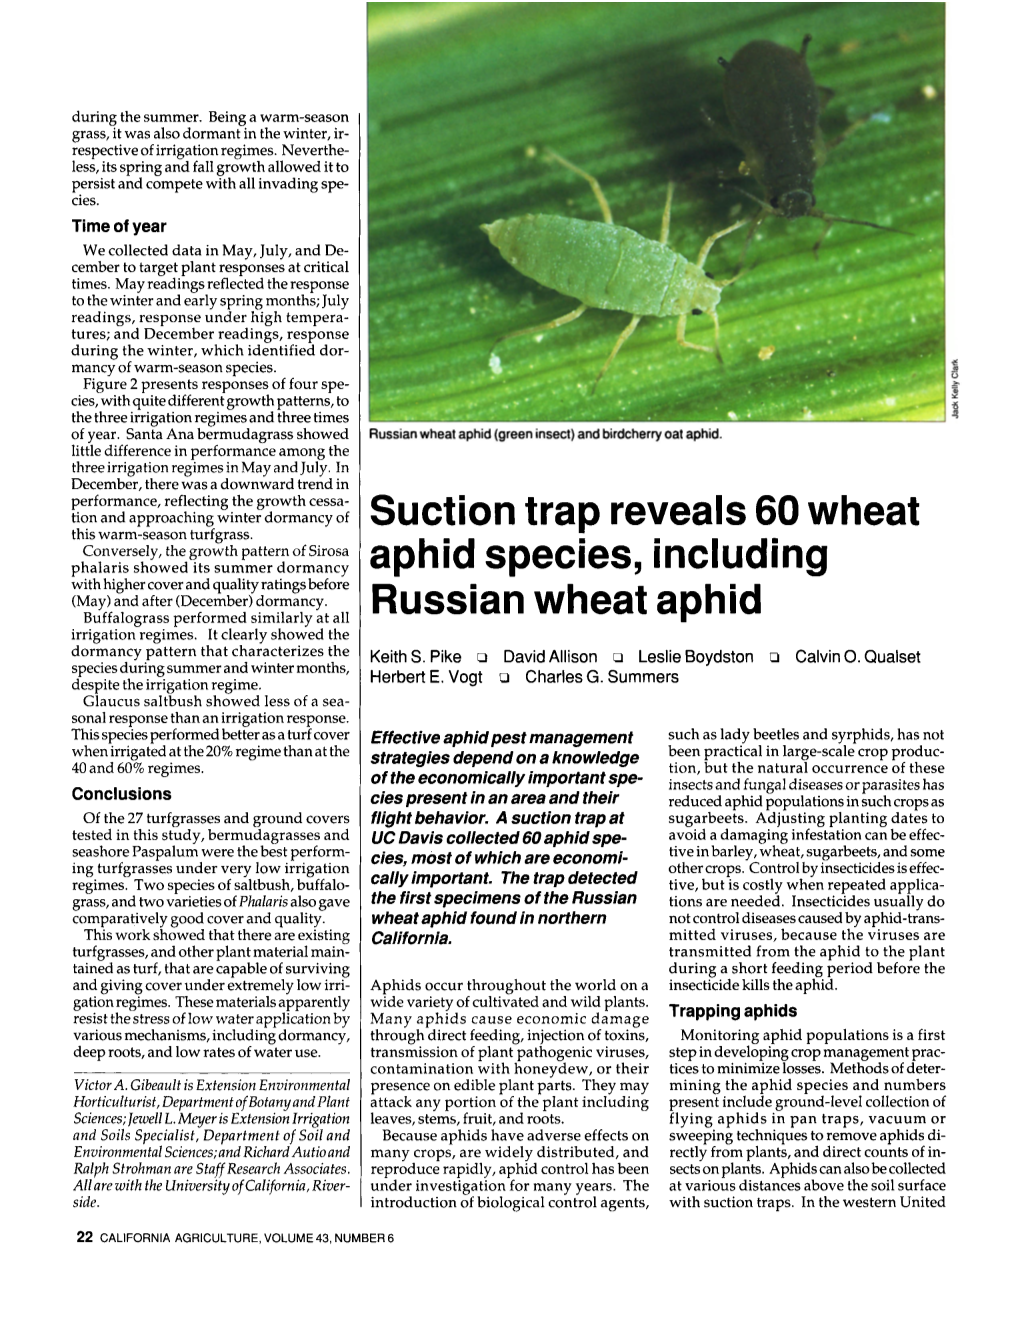 Suction Trap Reveals 60 Wheat Aphid Species, Including